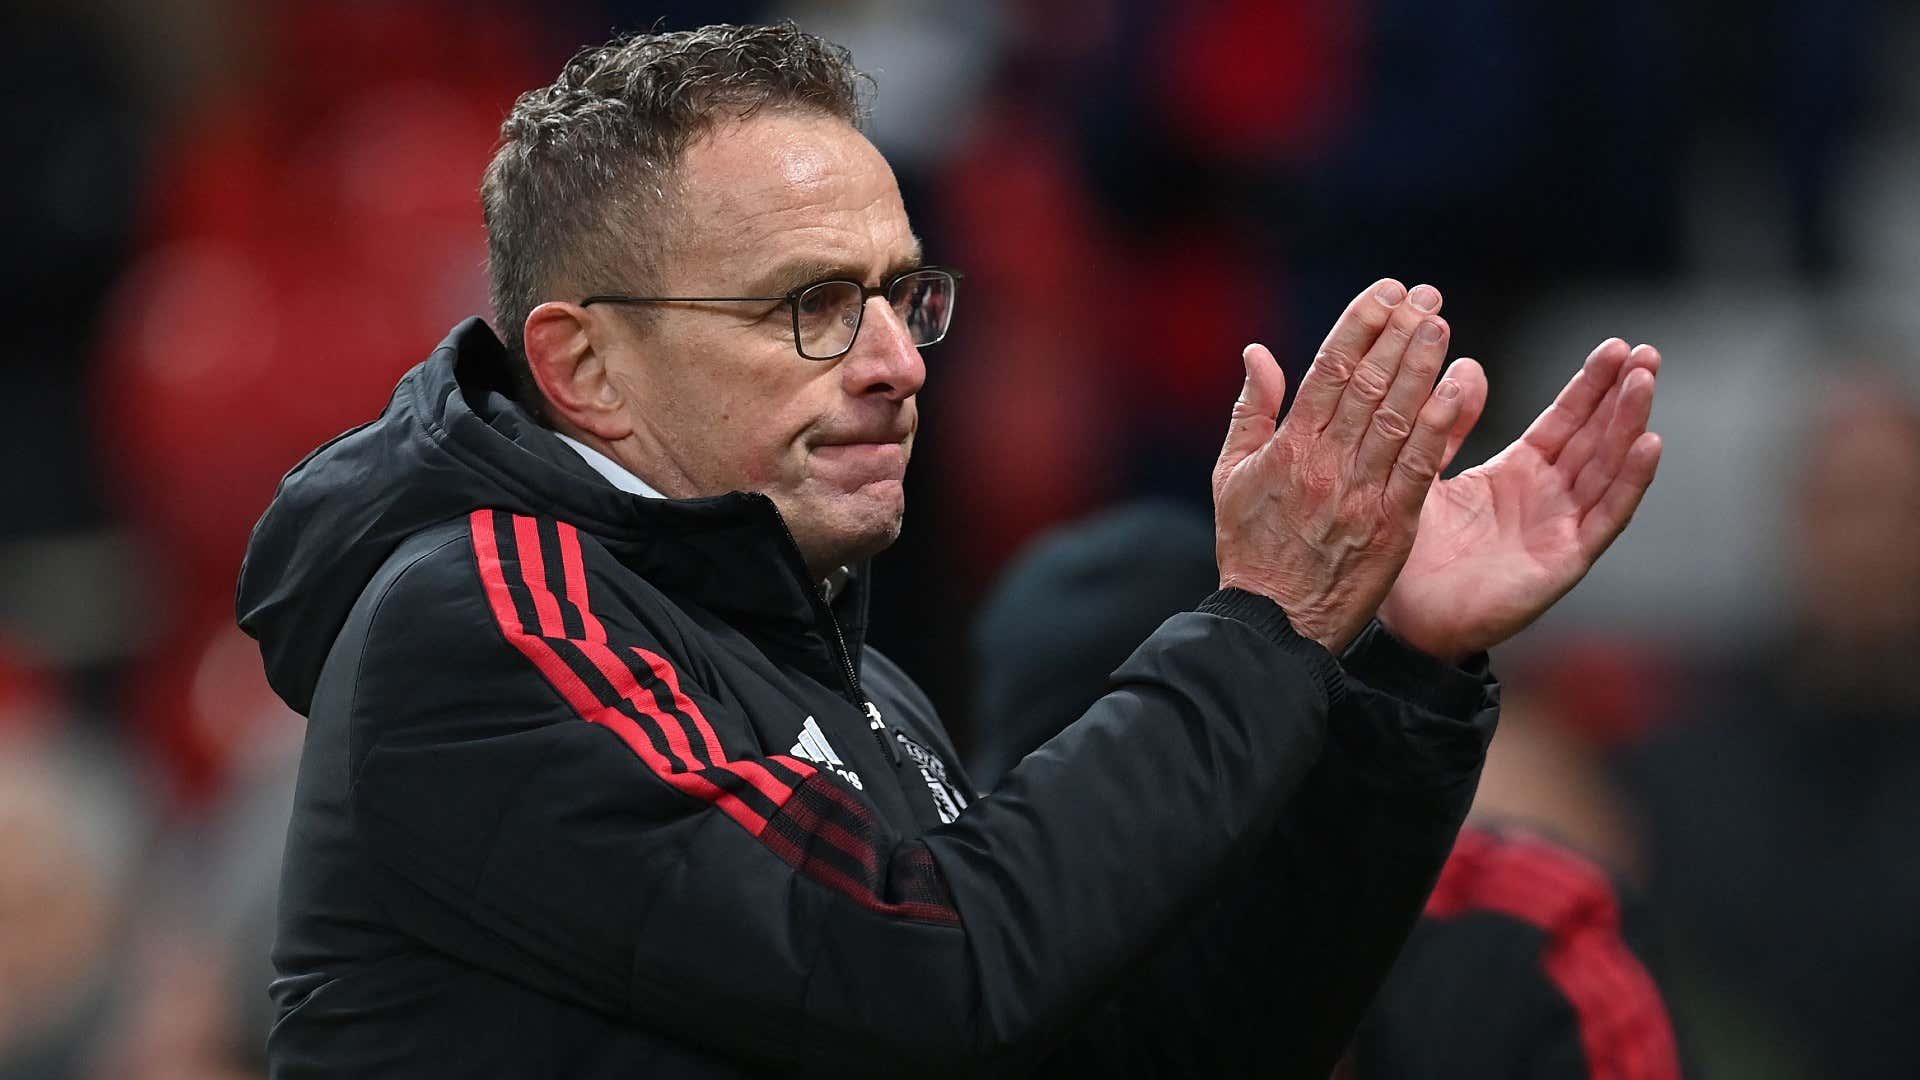 How good was Ralf Rangnick's 4-2-2-2 formation against Crystal Palace?